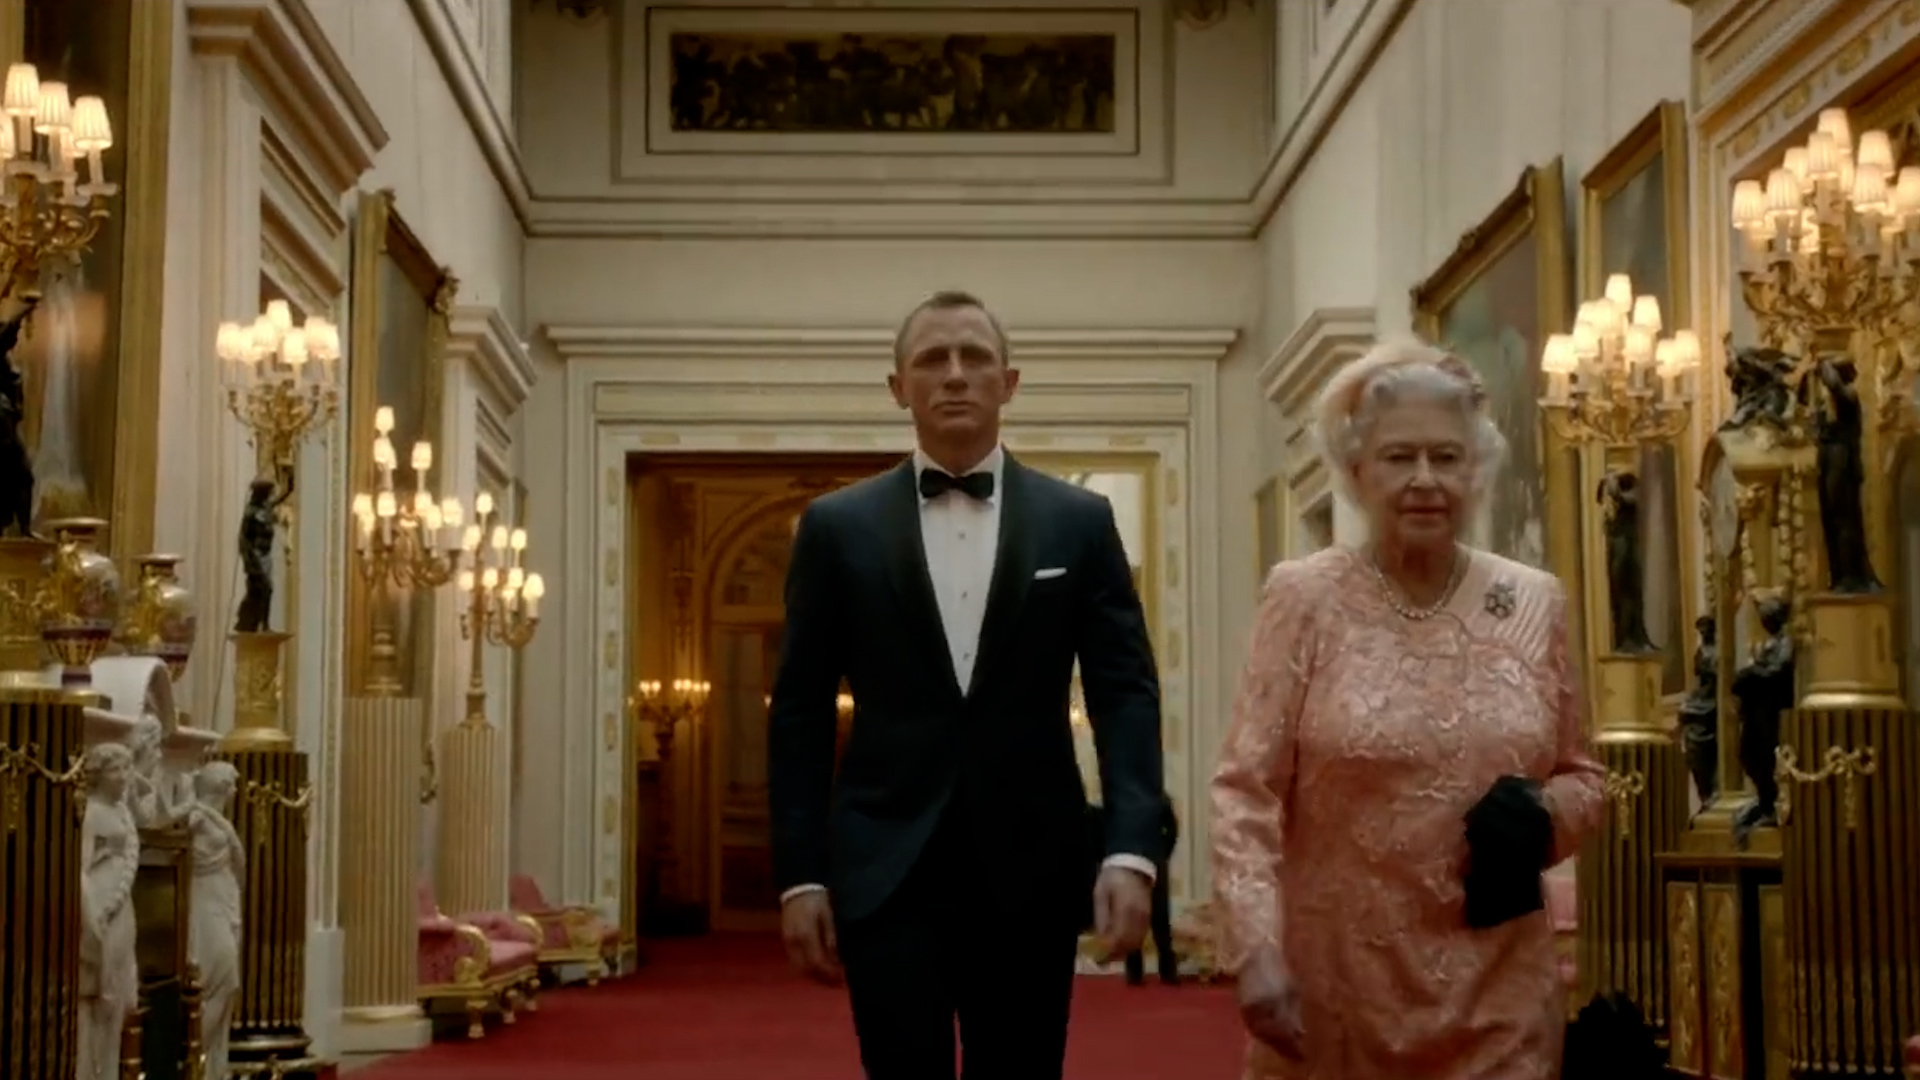 Daniel Craig, James Bond actor, on Queen Elizabeth II's death: We'll never see the likes of her again